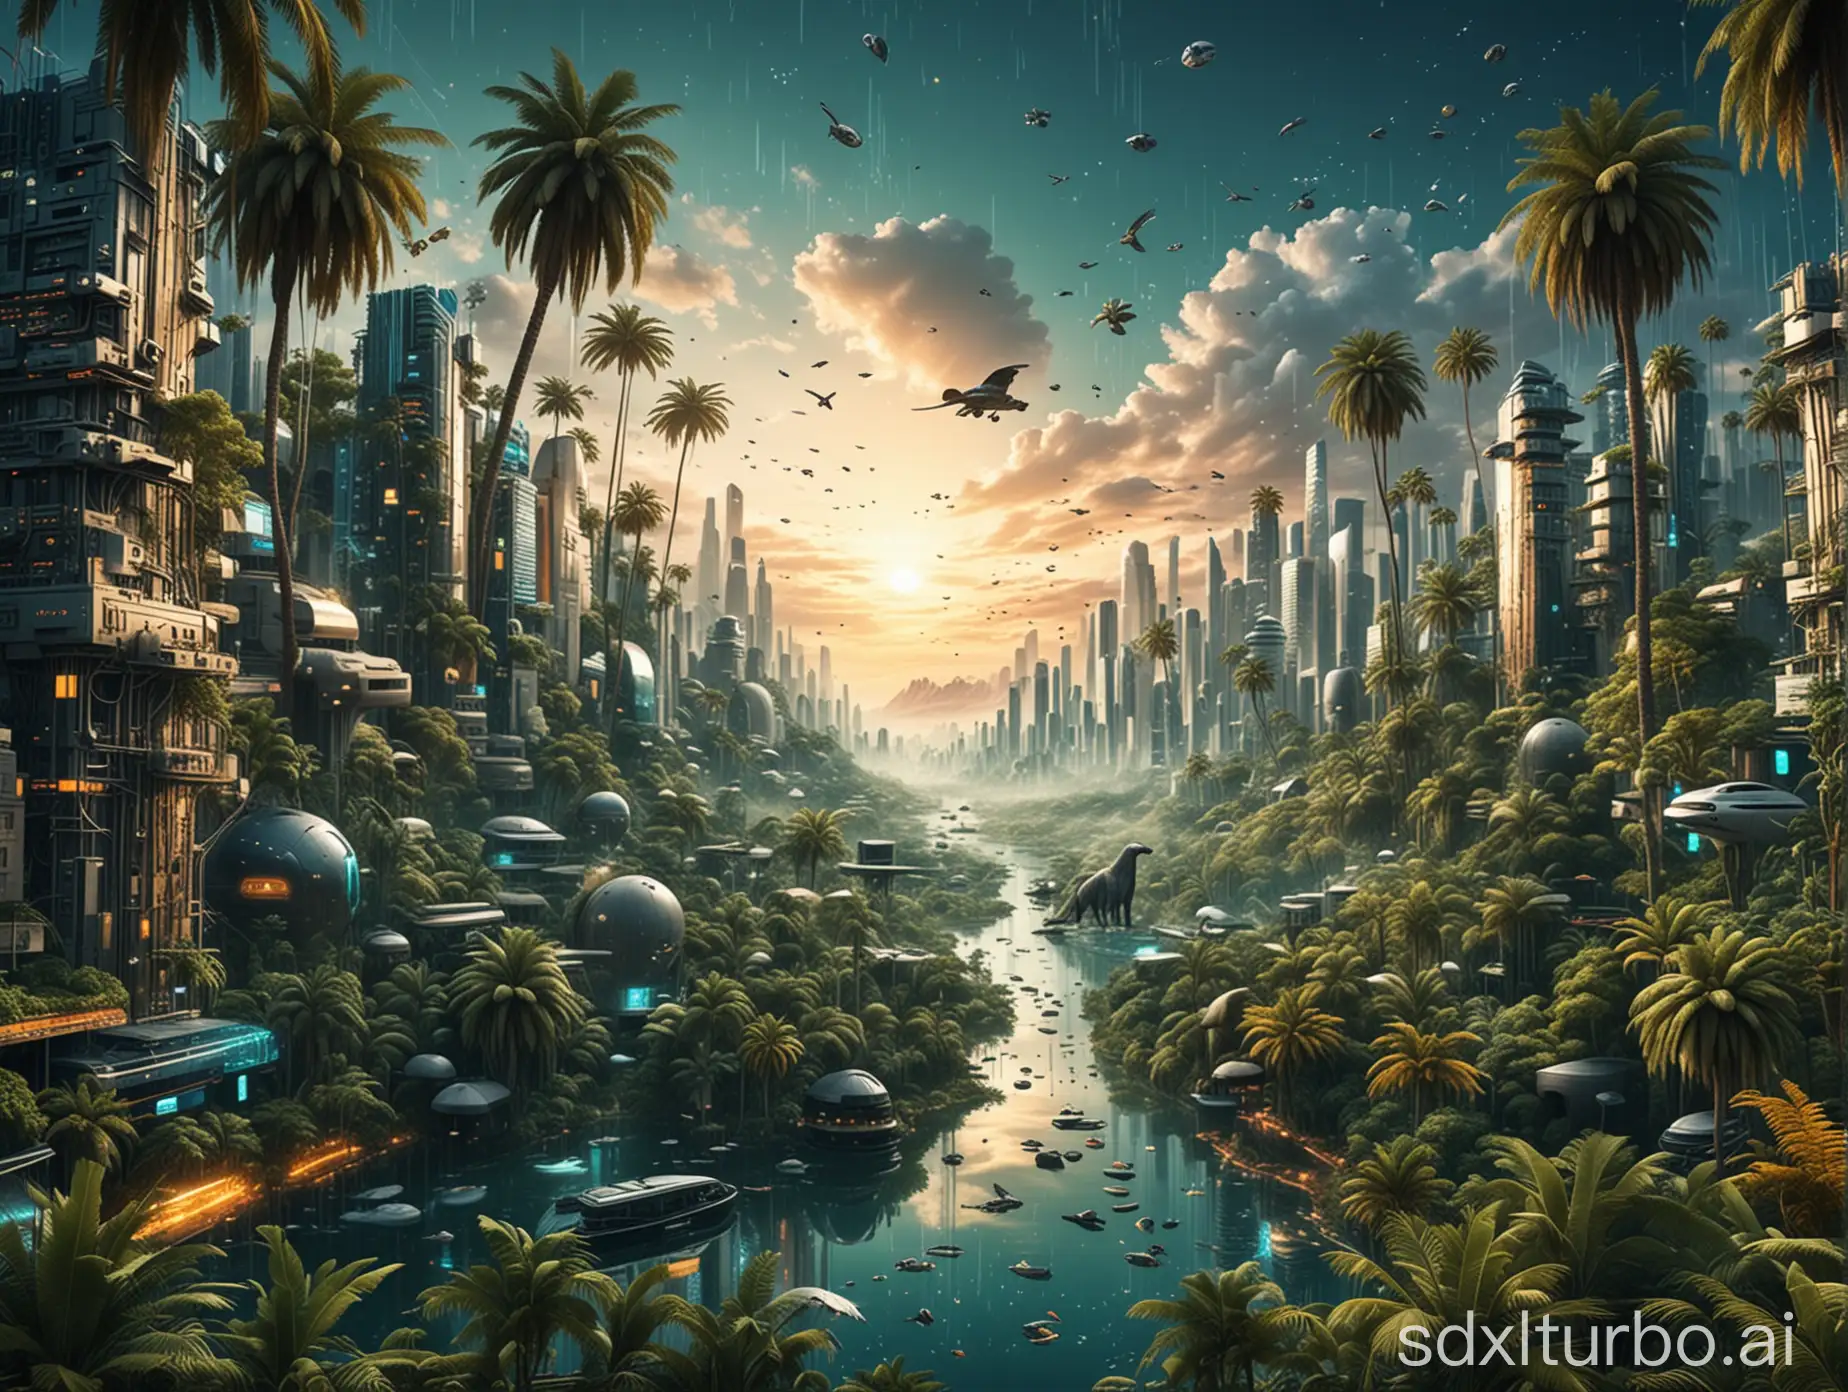 Futuristic-Engineering-City-Data-Flowing-Through-a-Jungle-Oasis